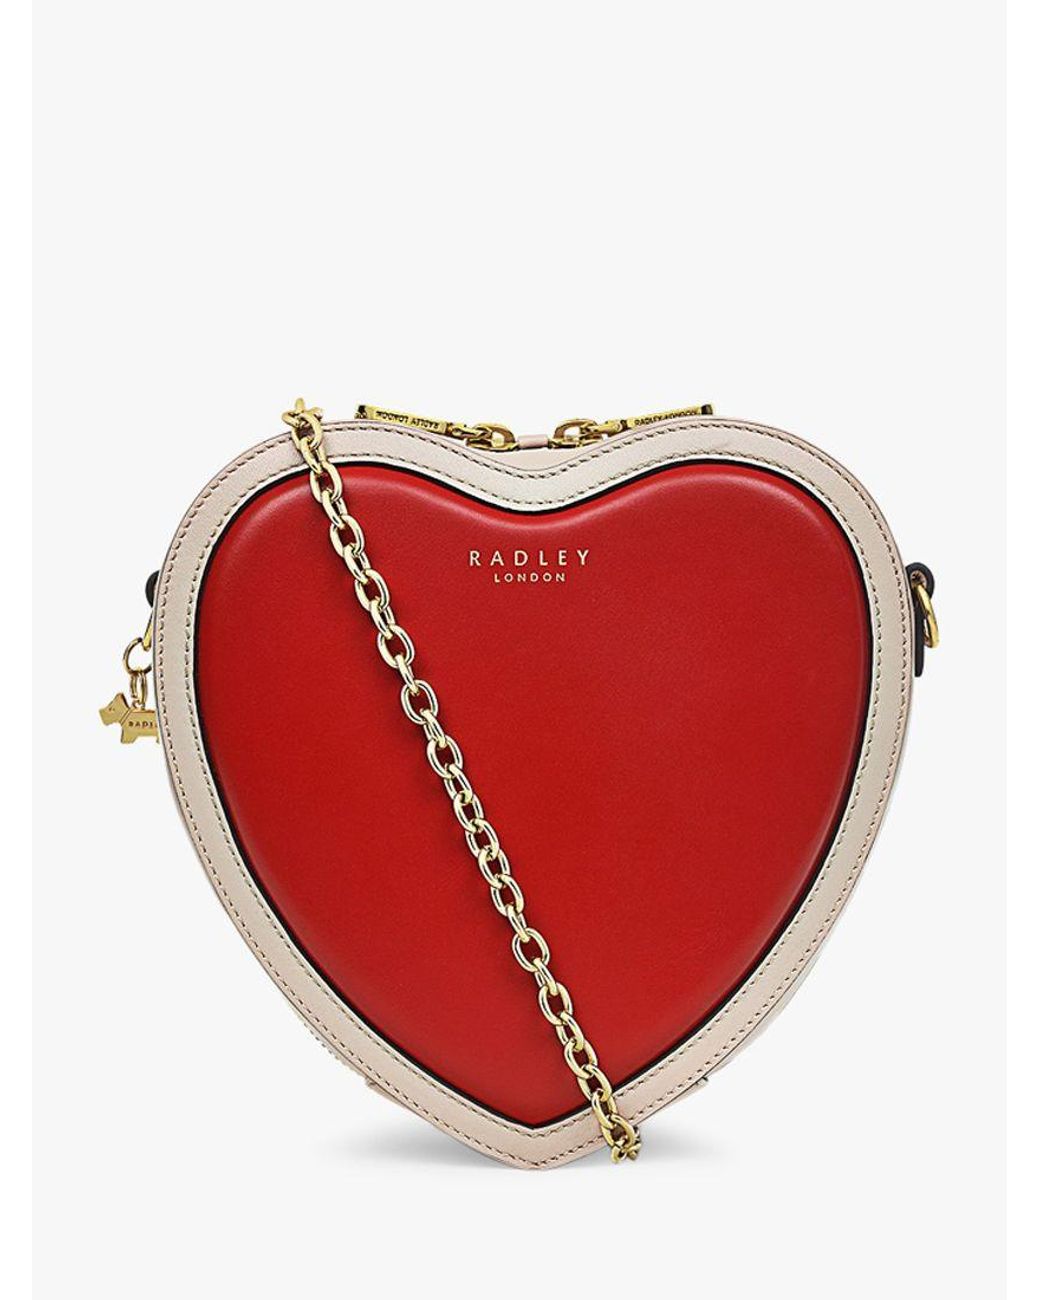 Radley Valentine's Collection Heart Shaped Cross Body Bag in Red | Lyst UK